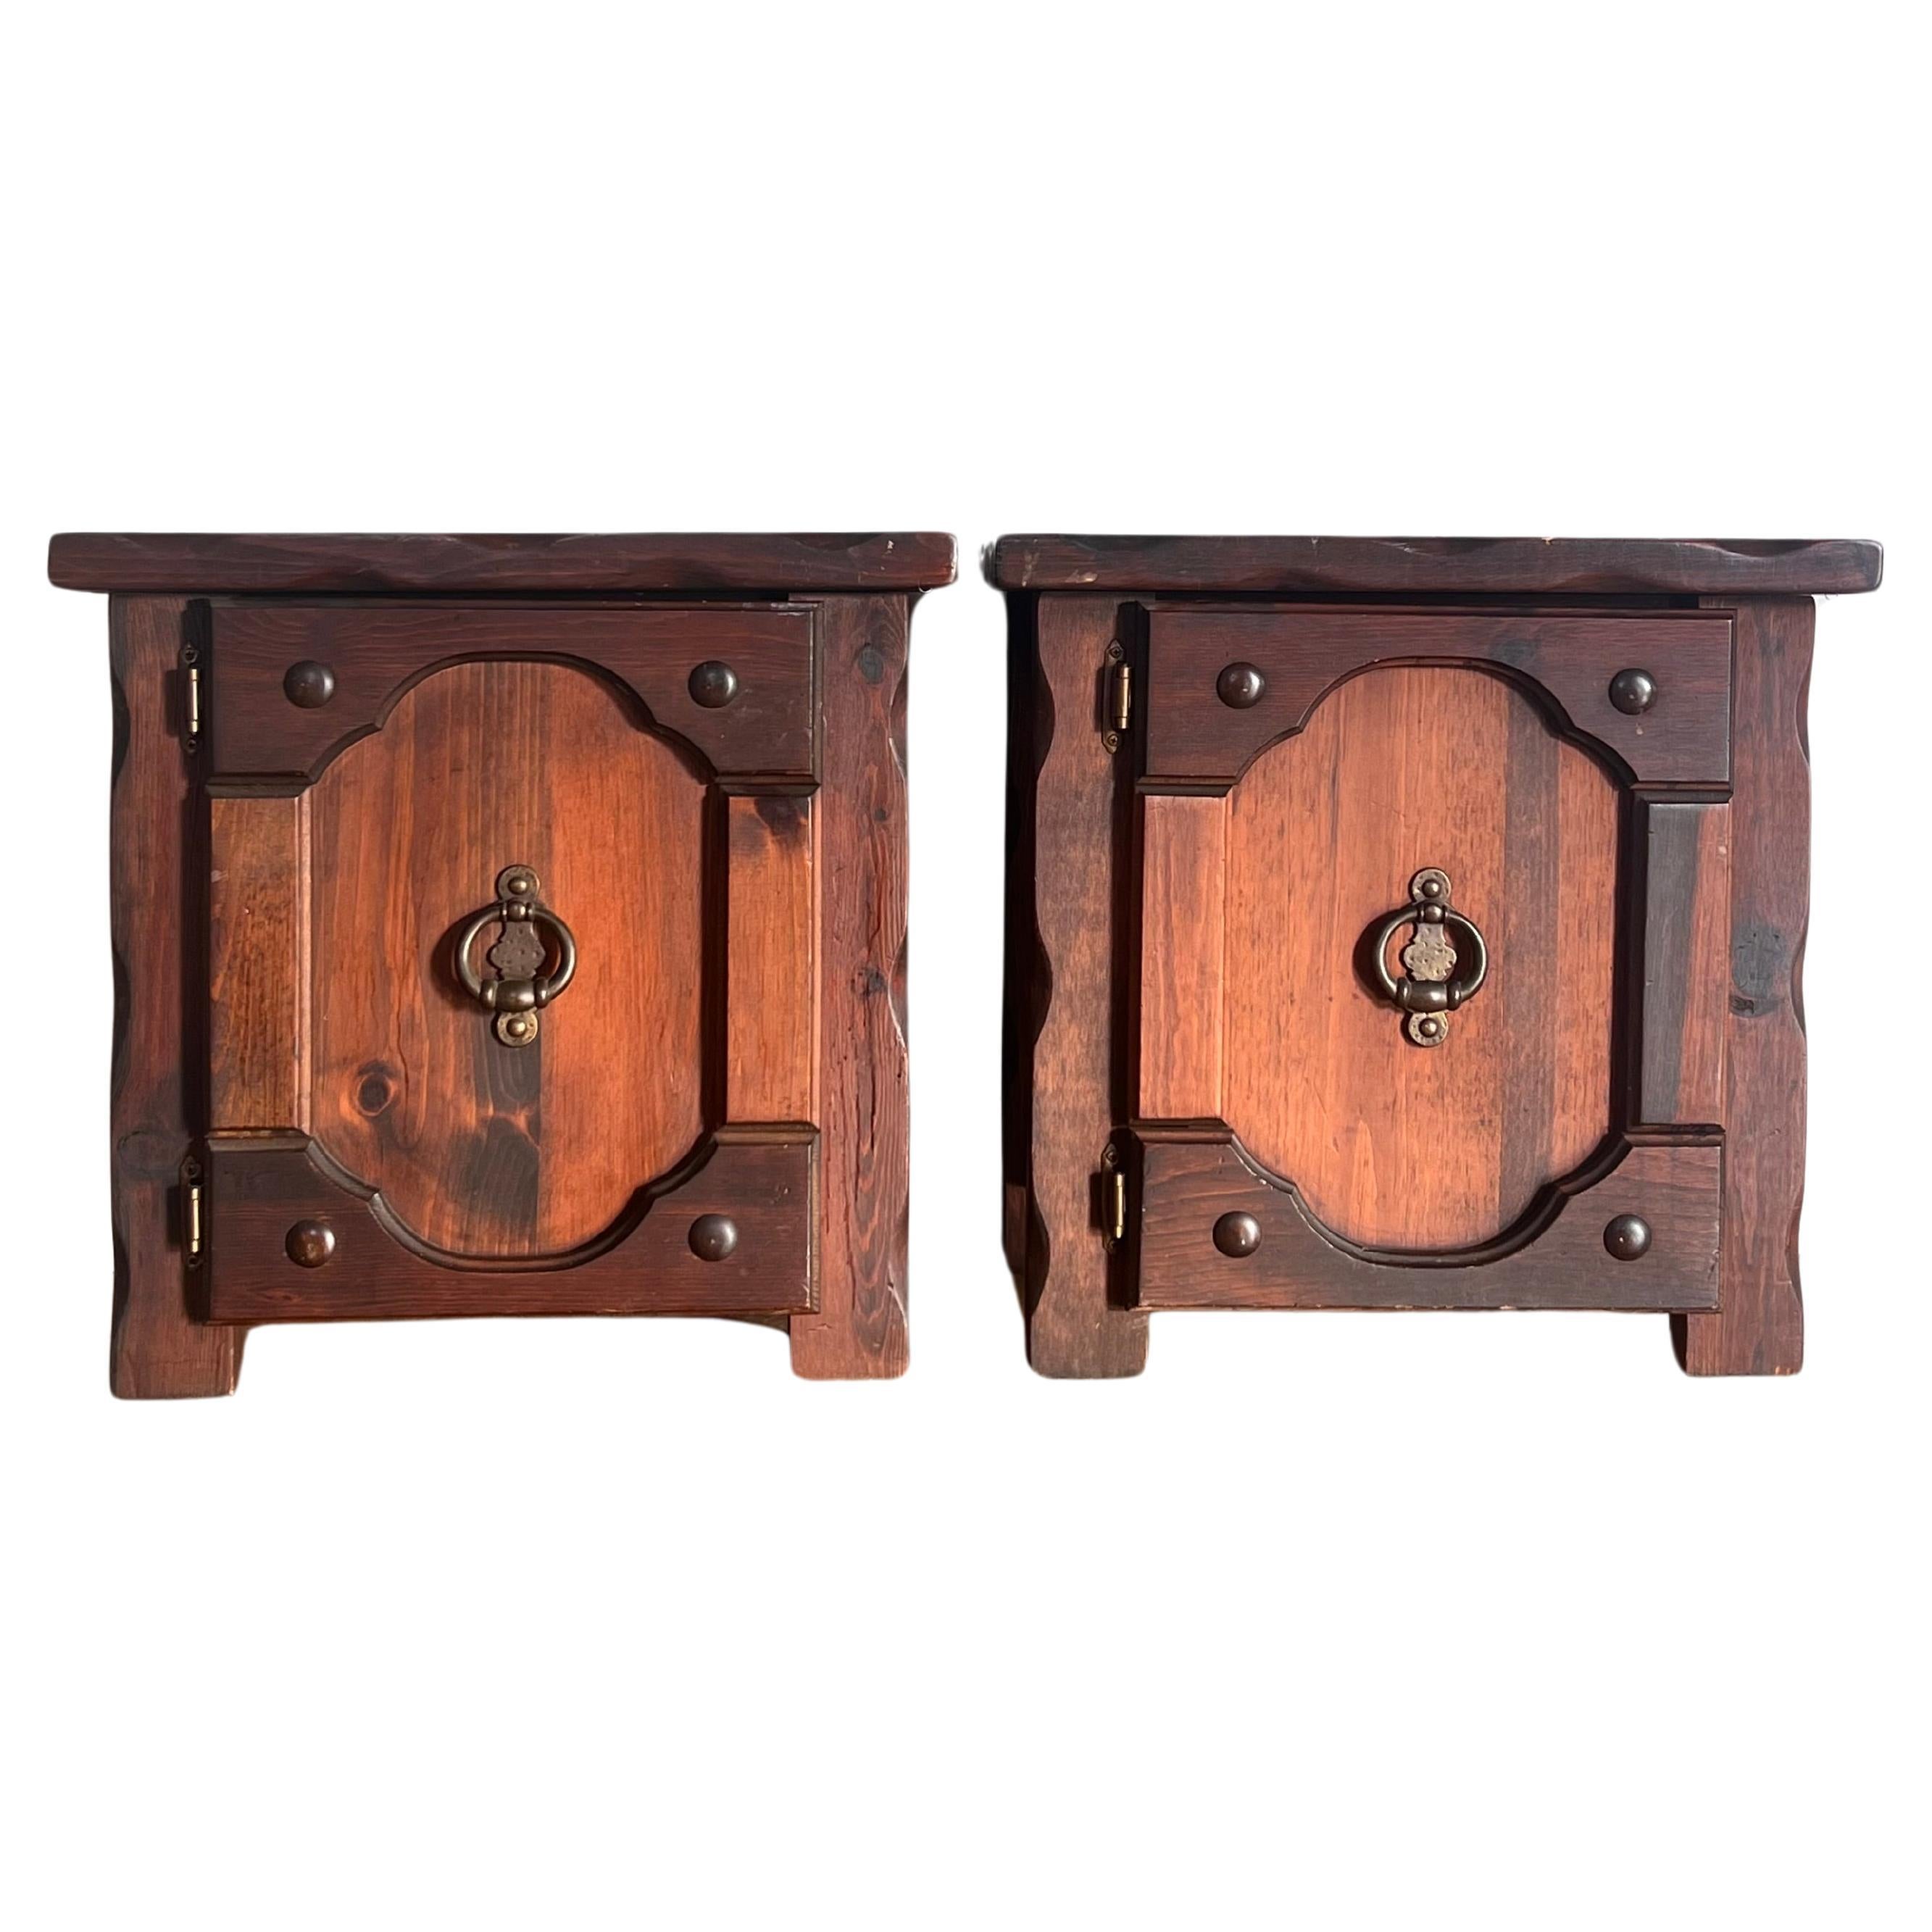 Mission craftsman gothic wooden nightstands with iron hardware, circa 1970